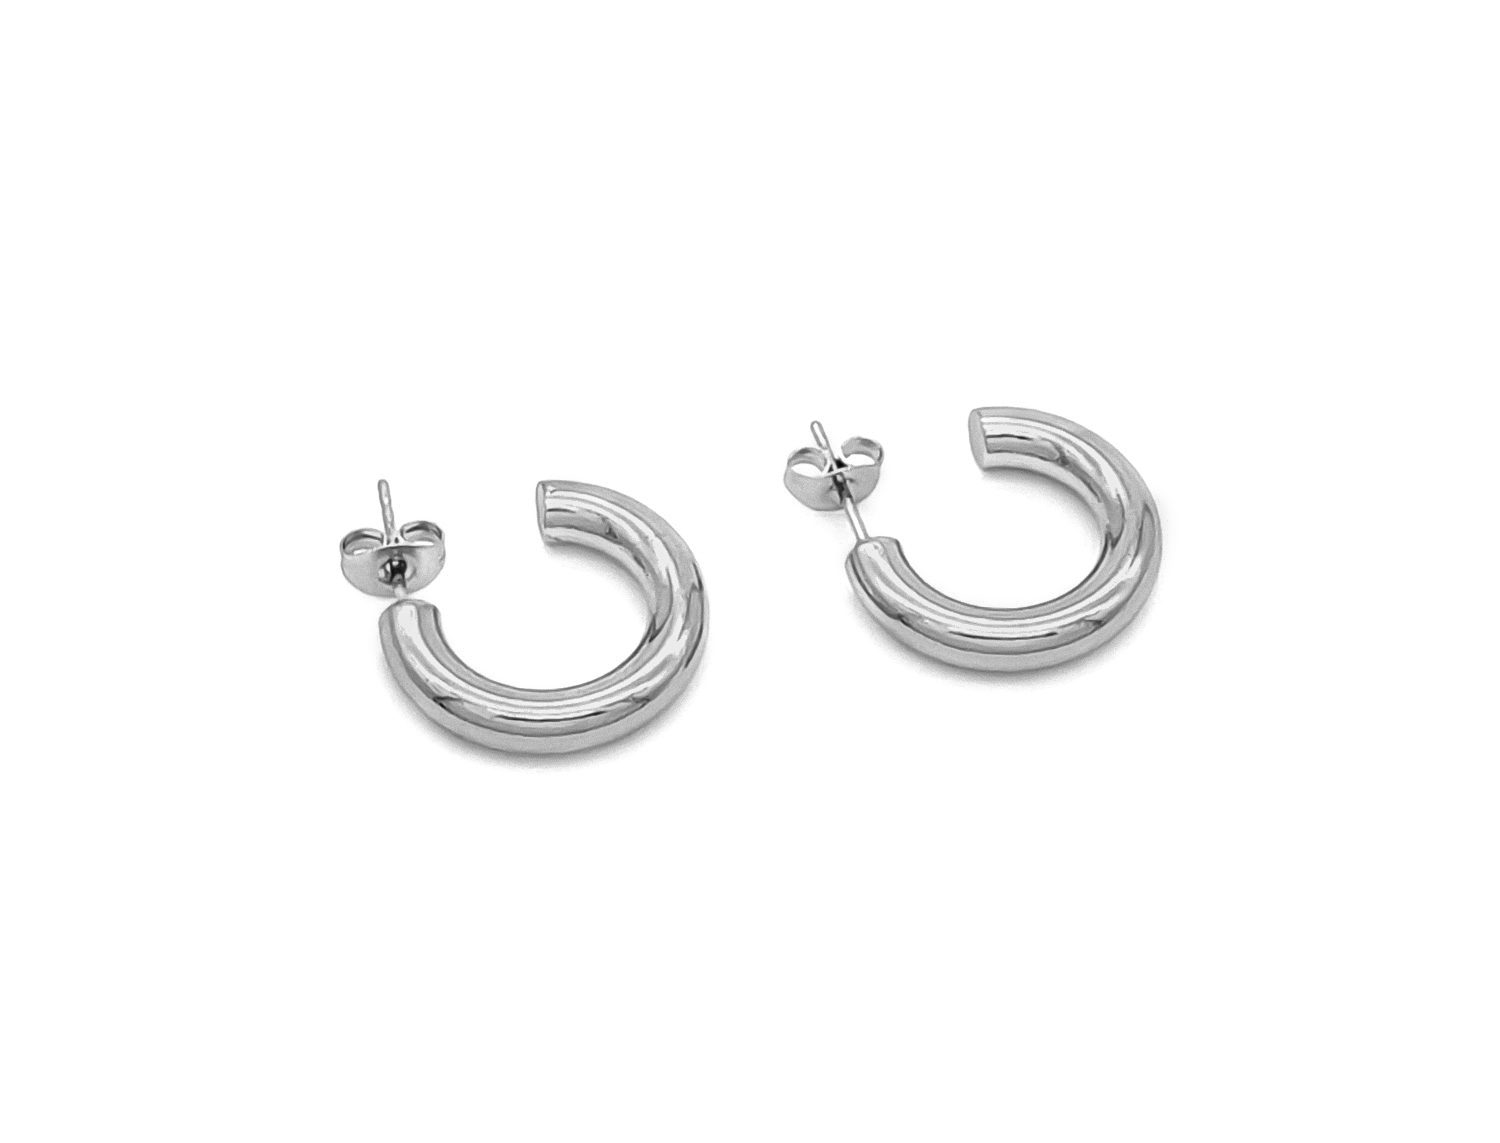 Silver Plated Open Thick Hoop Earrings 2.5cm - Adema